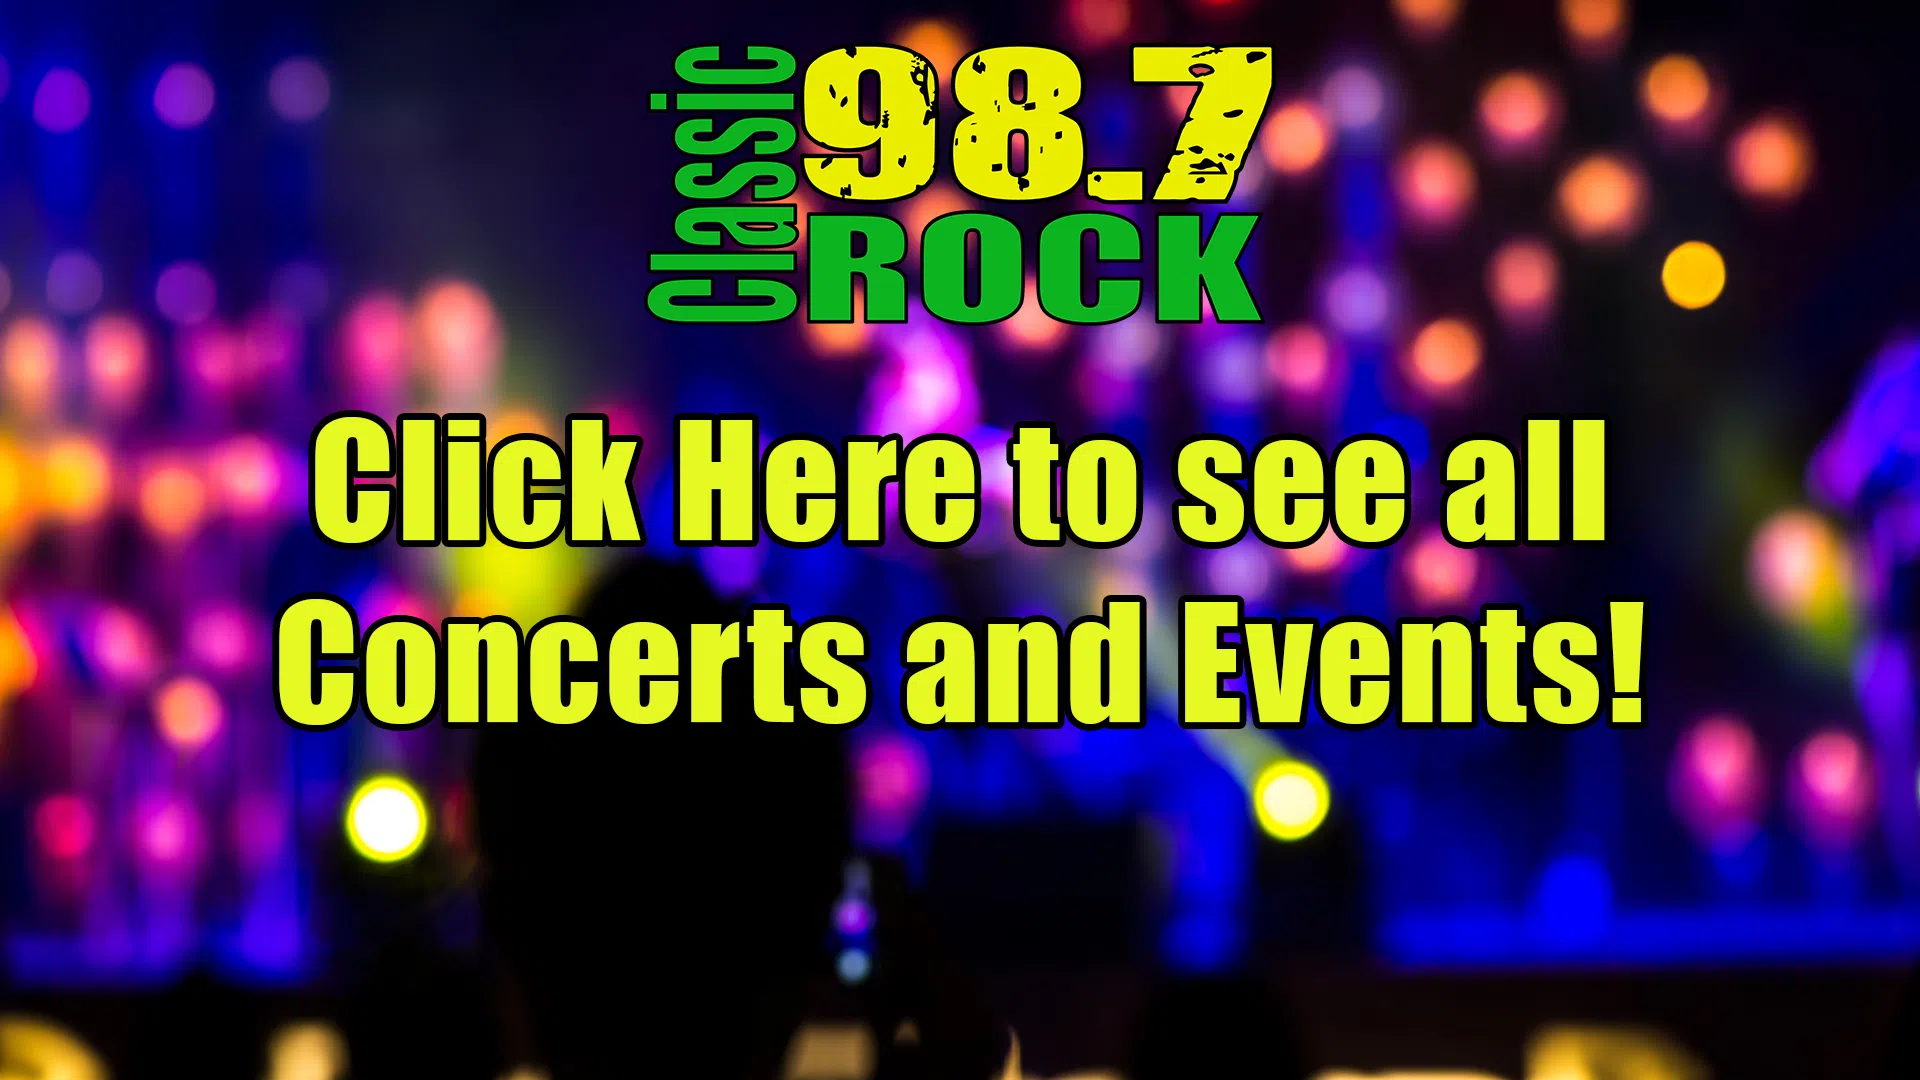 Feature: https://www.theclassicrockstation.com/concerts-events/